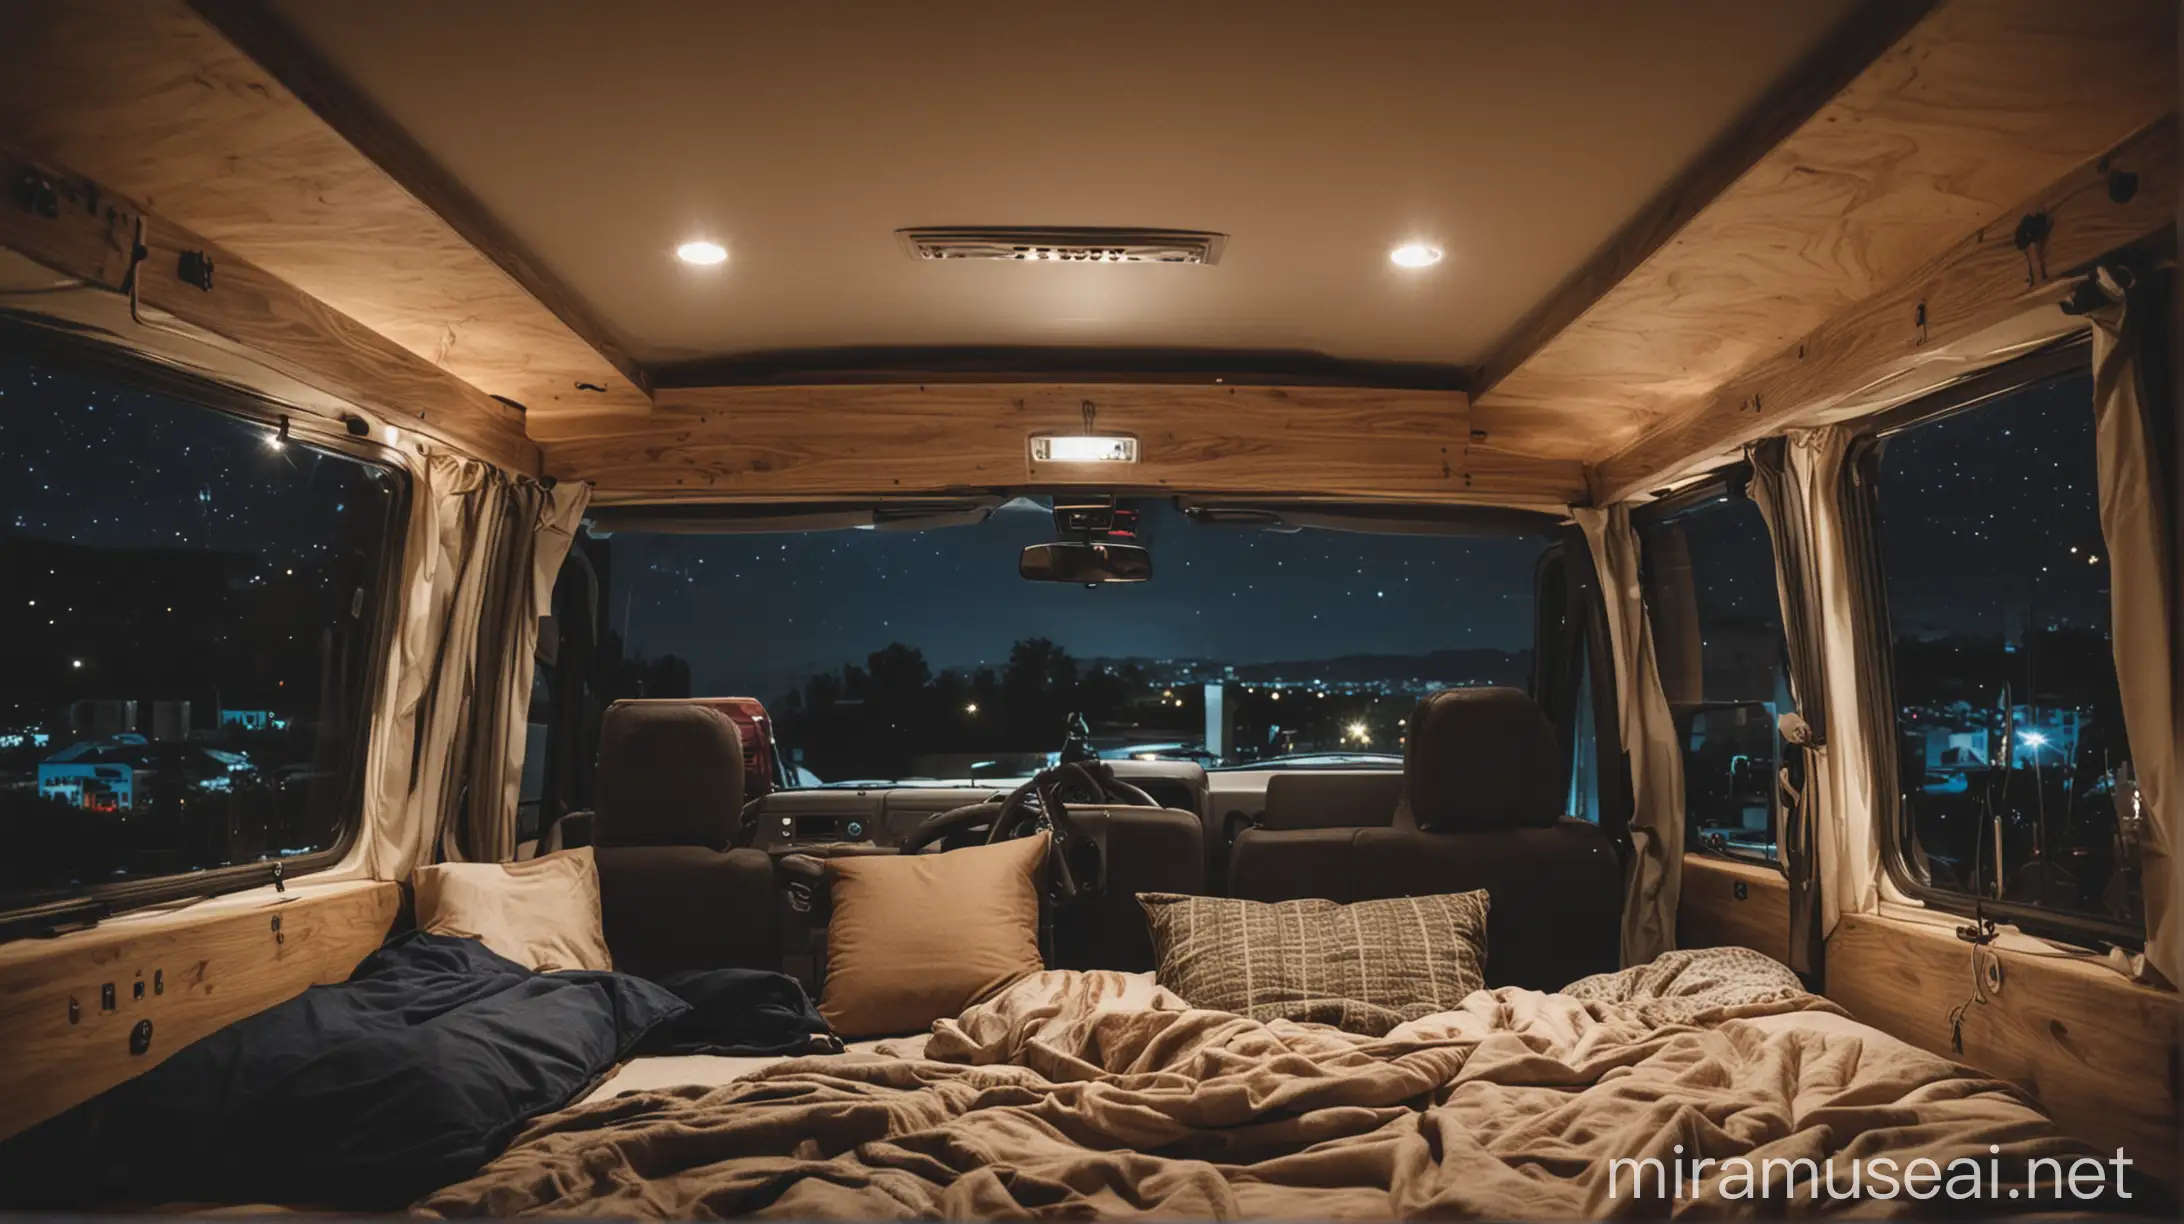 Cozy Nighttime Interior of Mobile Campervan with Wide Window